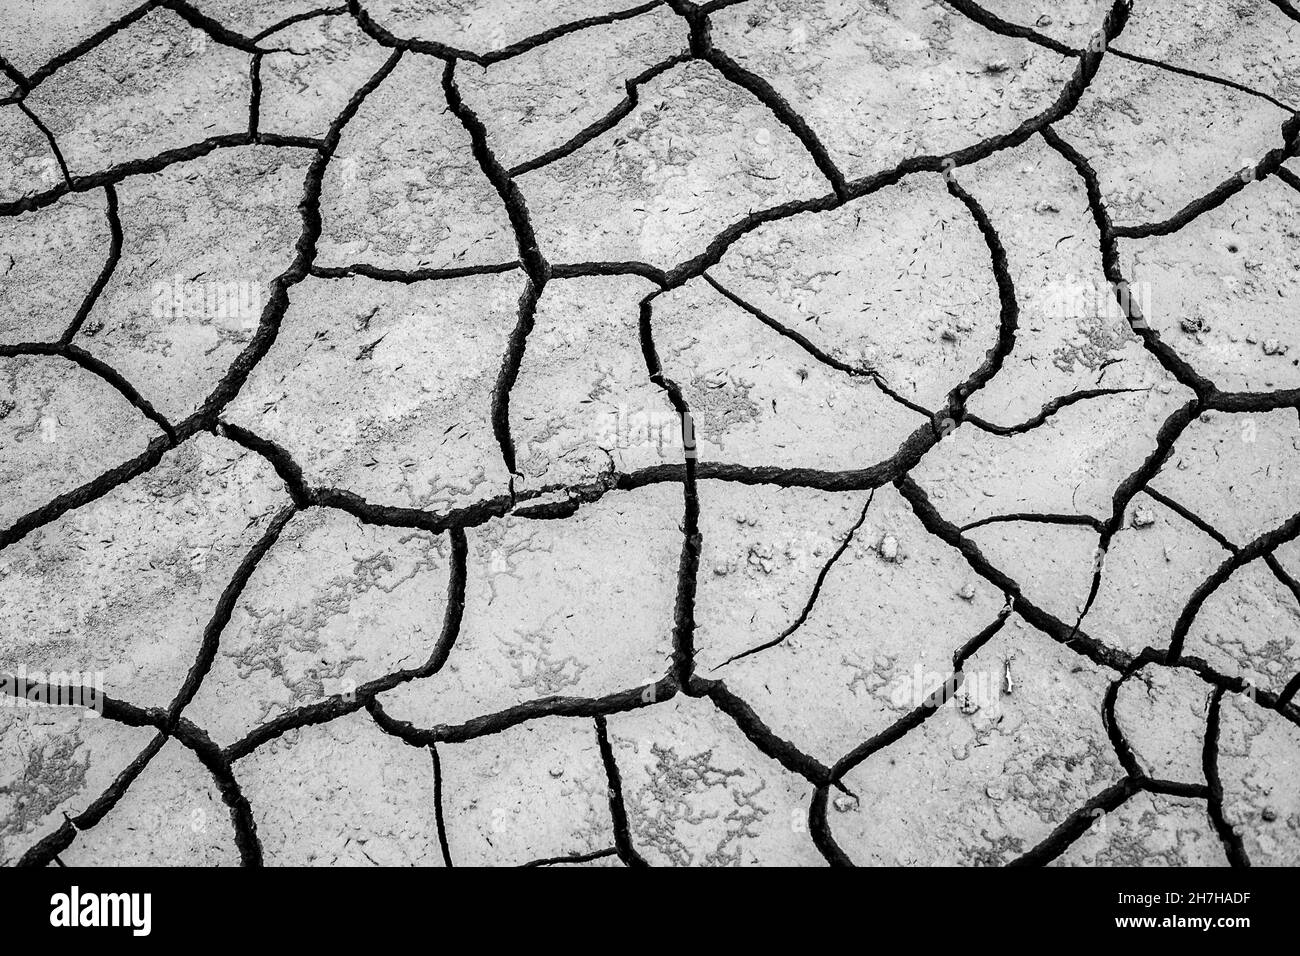 Black and white cracked earth texture background Stock Photo